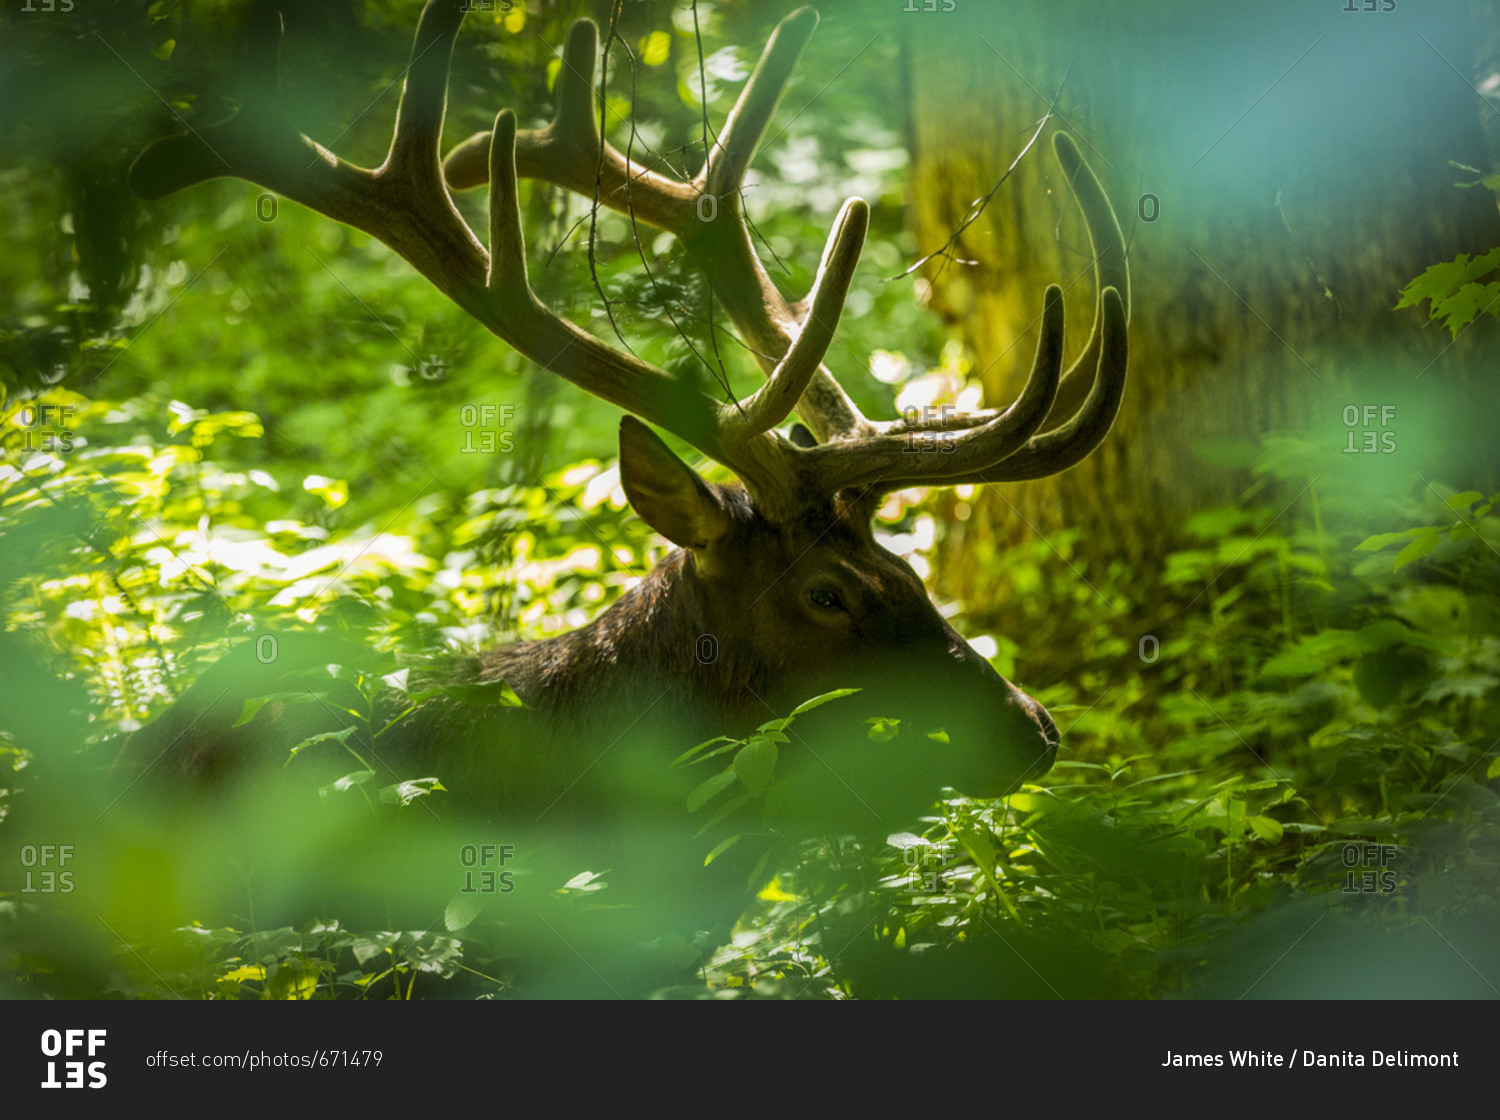 A rocky mountain elk is pictured resting in the thick forest of the Great Smoky Mountains National Park